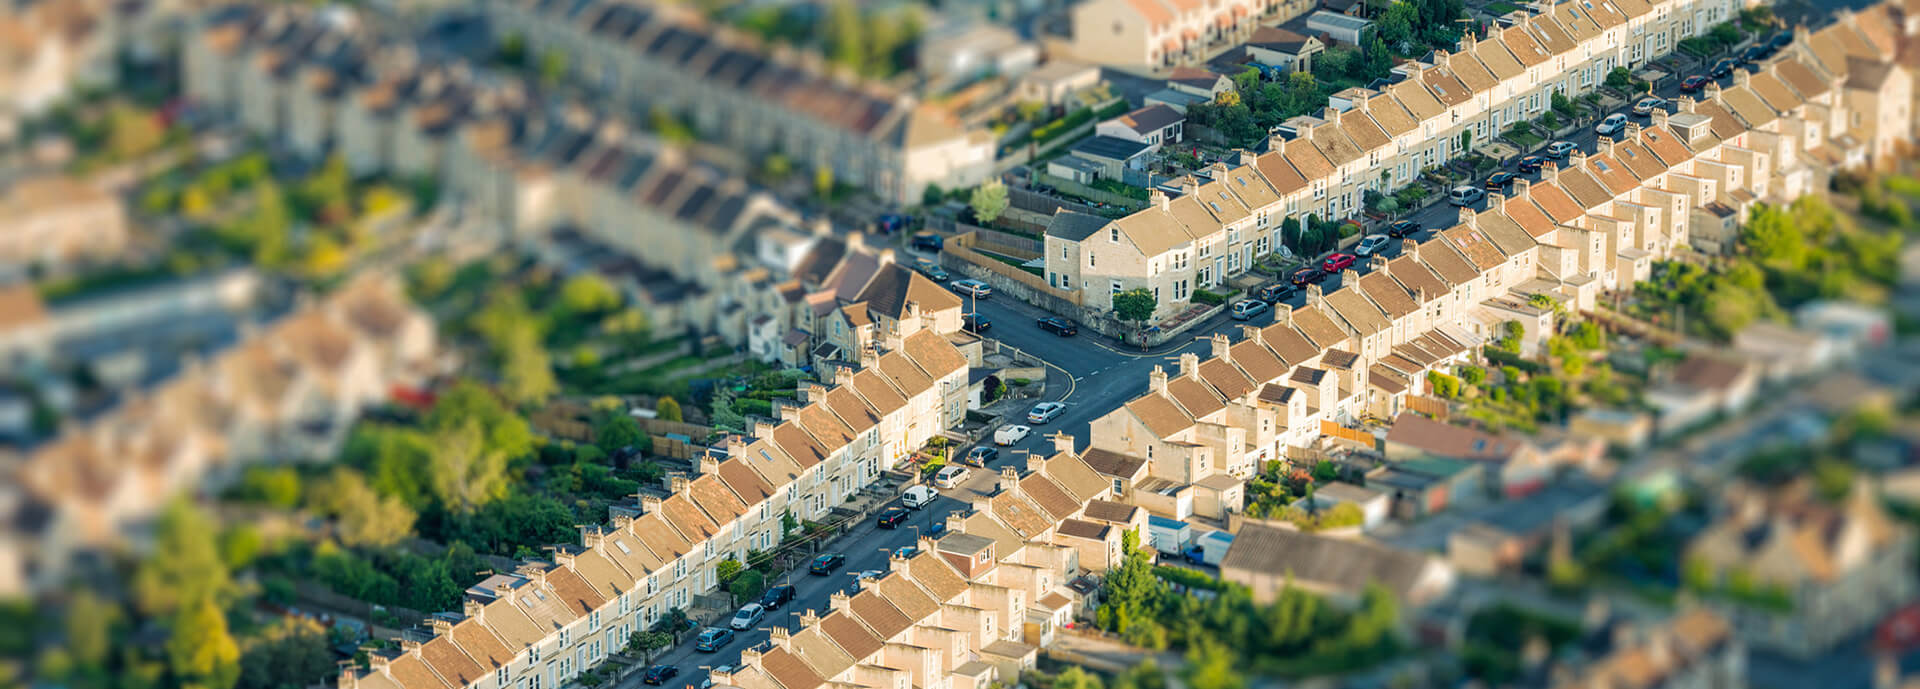 Overhead view of streets and houses